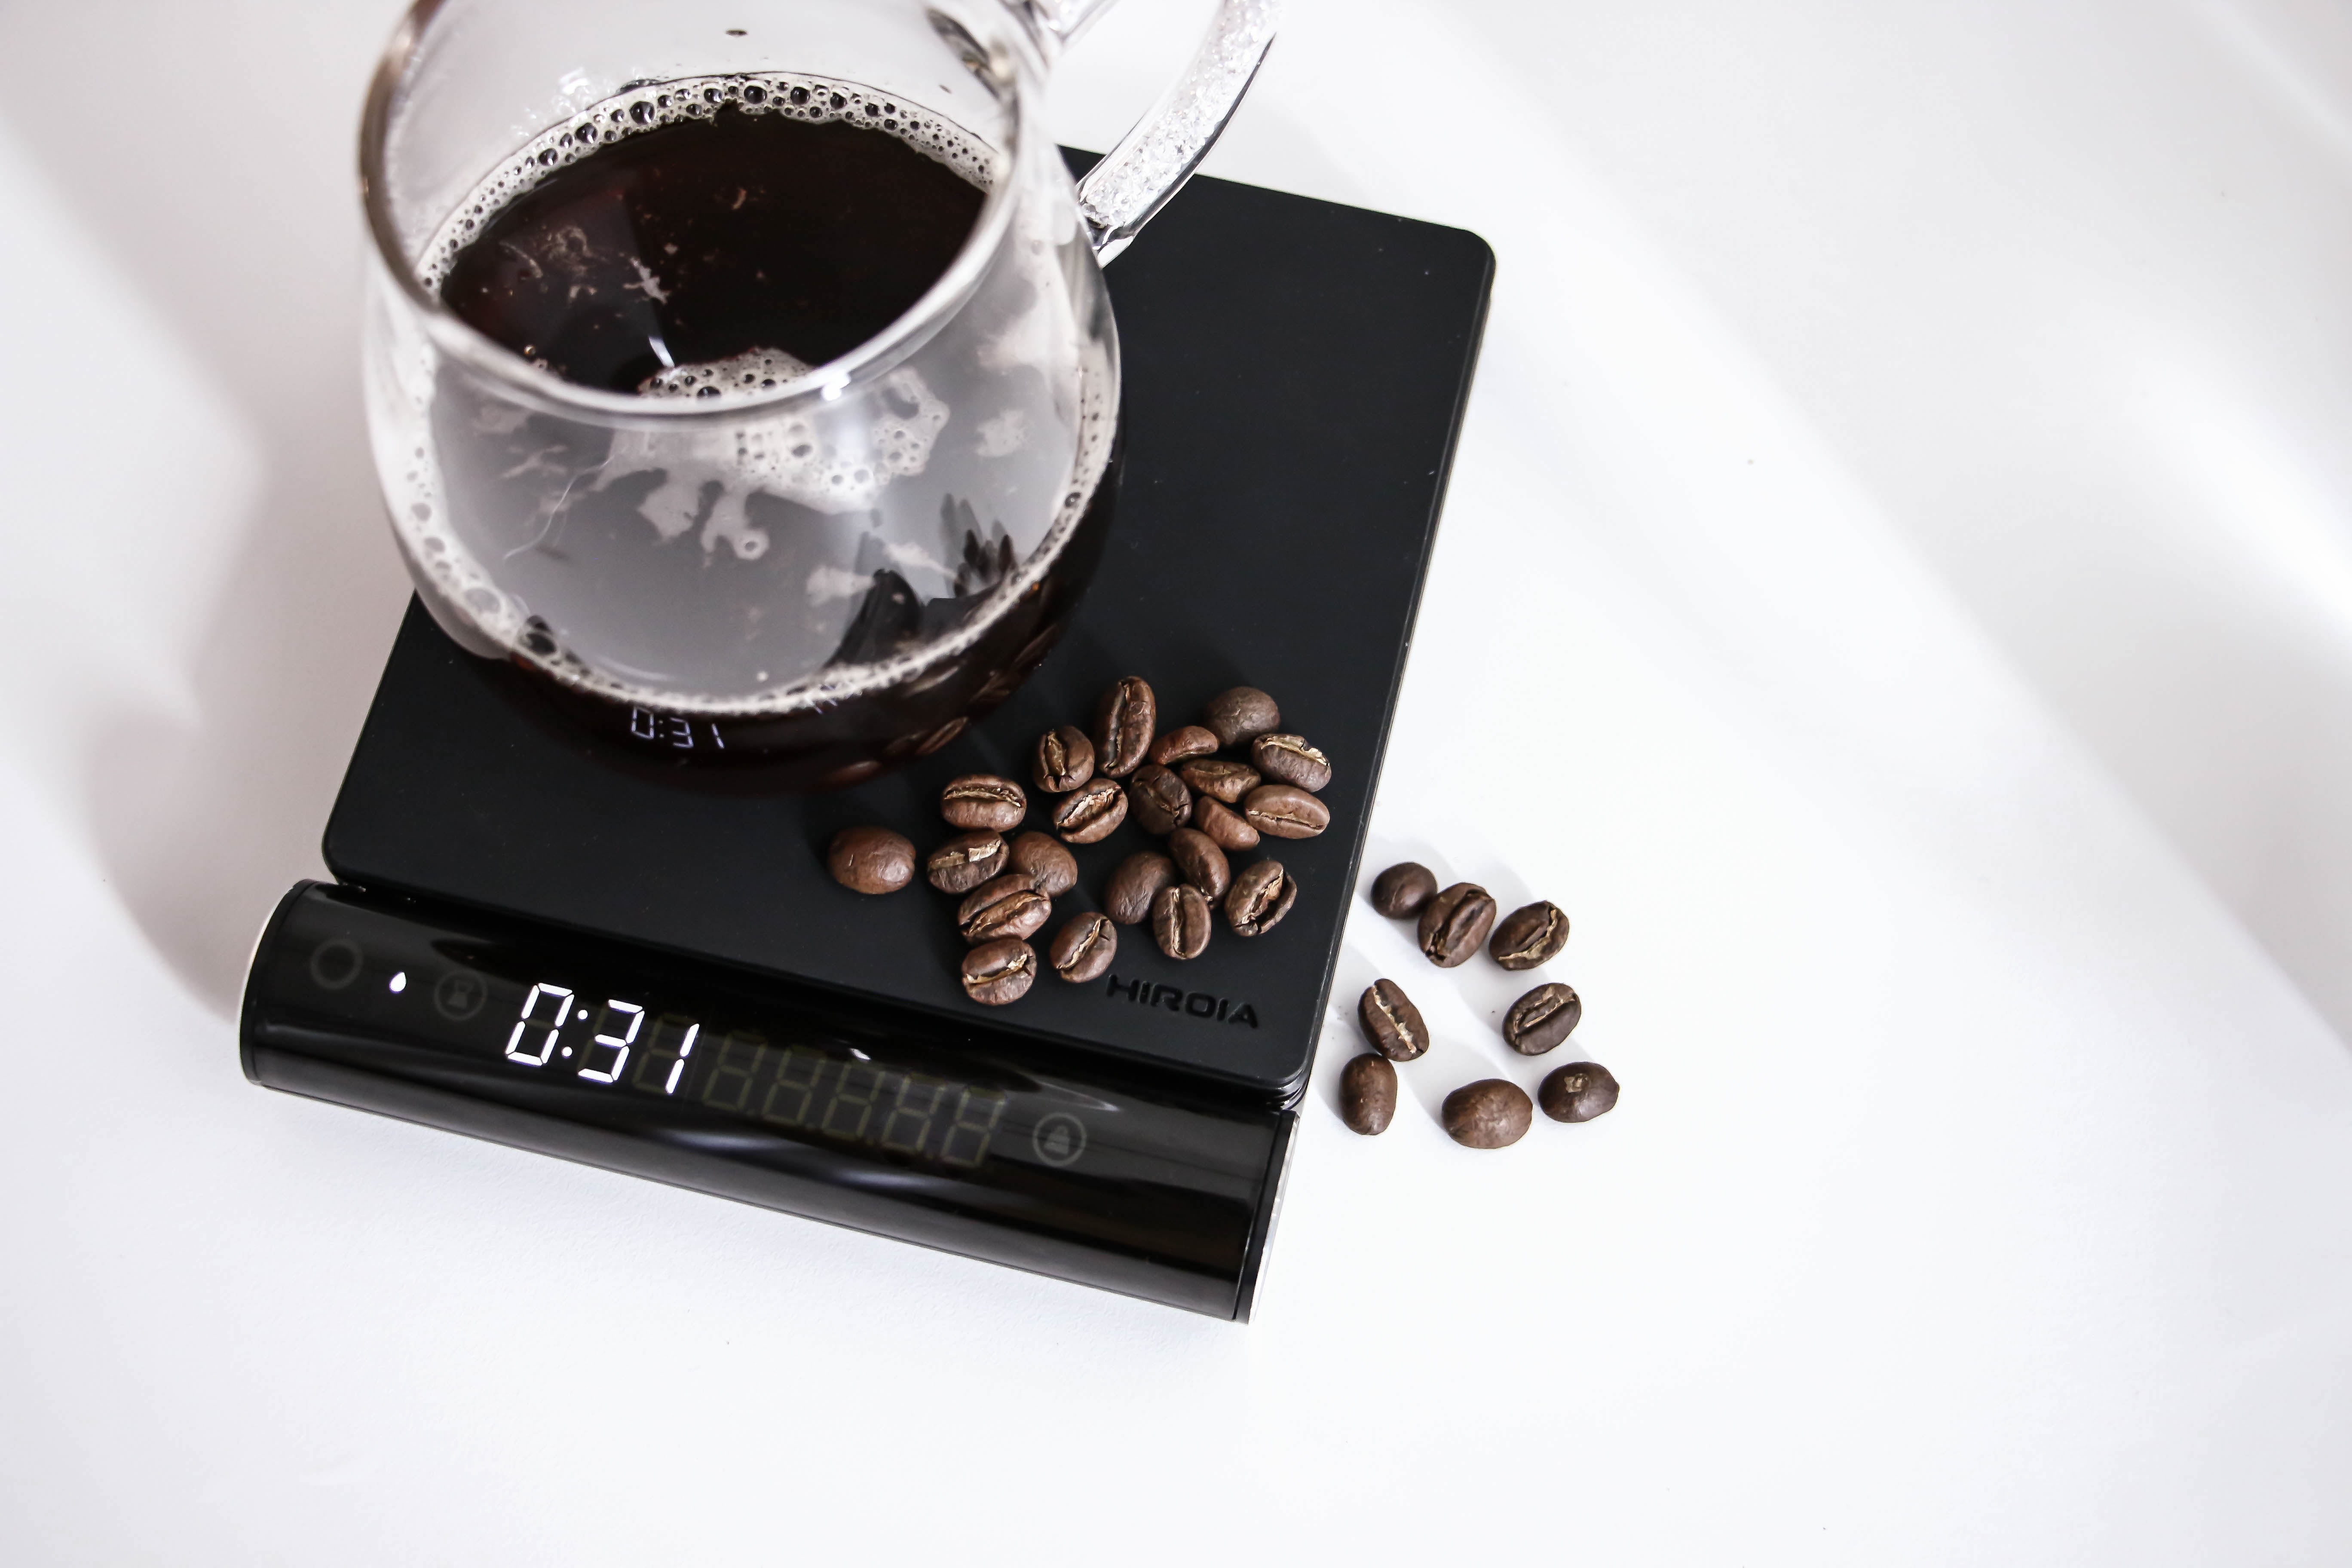 Fellow Tally Precision Scale – George Howell Coffee